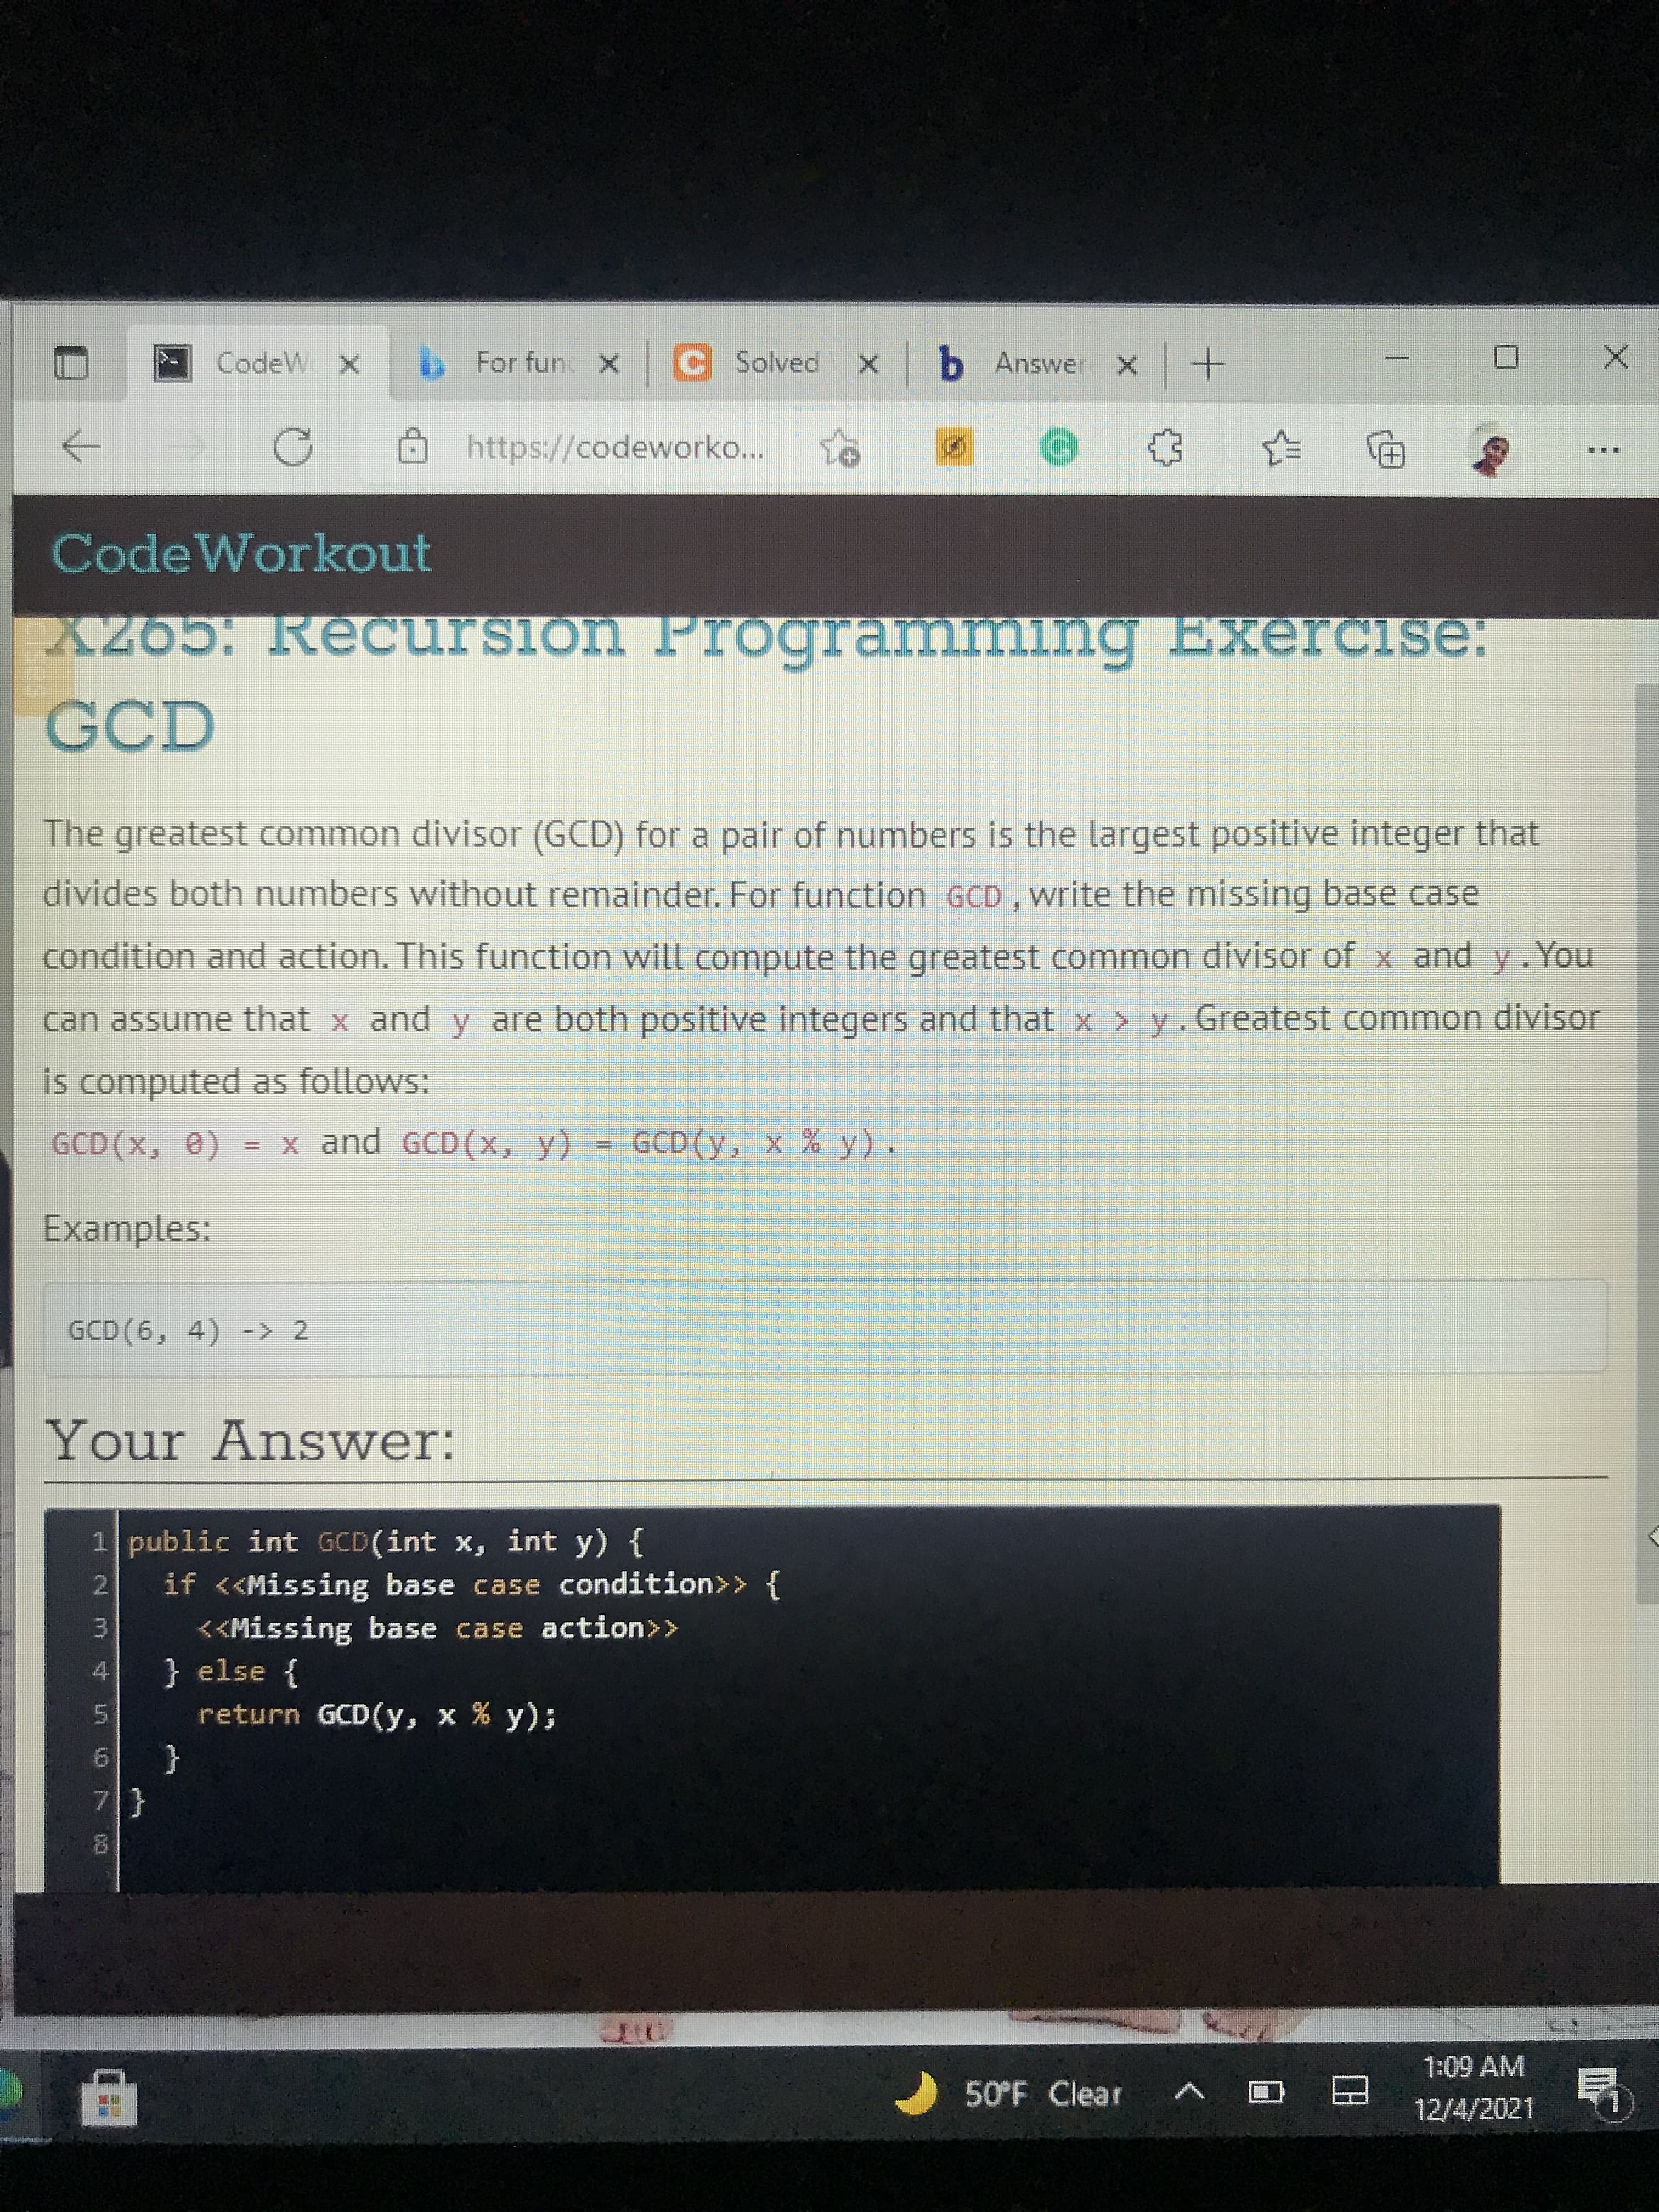 CodeW X
bFor fun X C Solved x b Answer
+ x
https://codeworko...
CodeWorkout
X265: Recursion Programmlng Exercise:
GCD
The greatest common divisor (GCD) for a pair of numbers is the largest positive integer that
divides both numbers without remainder. For function GCD , write the missing base case
condition and action. This function will compute the greatest common divisor of x and y.You
can assume that x and y are both positive integers and that x > y. Greatest common divisor
is computed as follows:
= x and GCD(x, y) = GCD(y, x % y).
Examples:
GCD (6, 4) -> 2
Your An swer:
1 public int GCD(int x, int y) {
if <<Missing base case condition>> {
2.
<<Missing base case action>>
3.
} else {
4.
return GCD(y, x % y);
9.
{
7.
1:09 AM
50°F Clear
1V 1.
12/4/2021
甲
